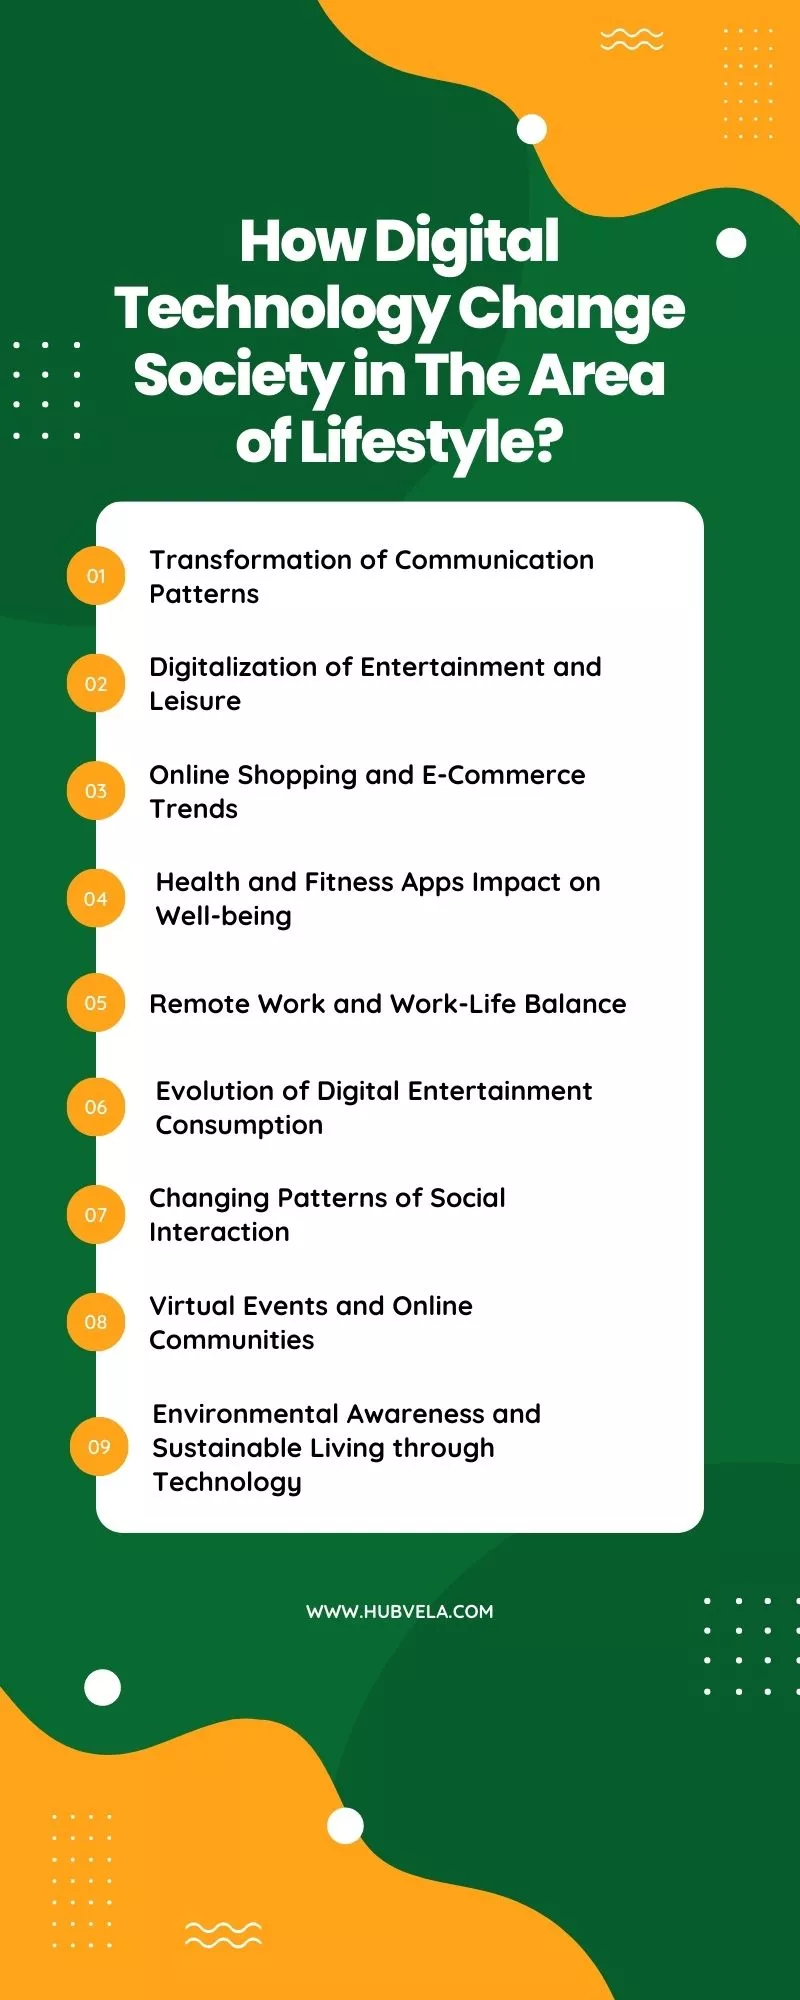 How Digital Technology Change Society in The Area of Lifestyle Infographic